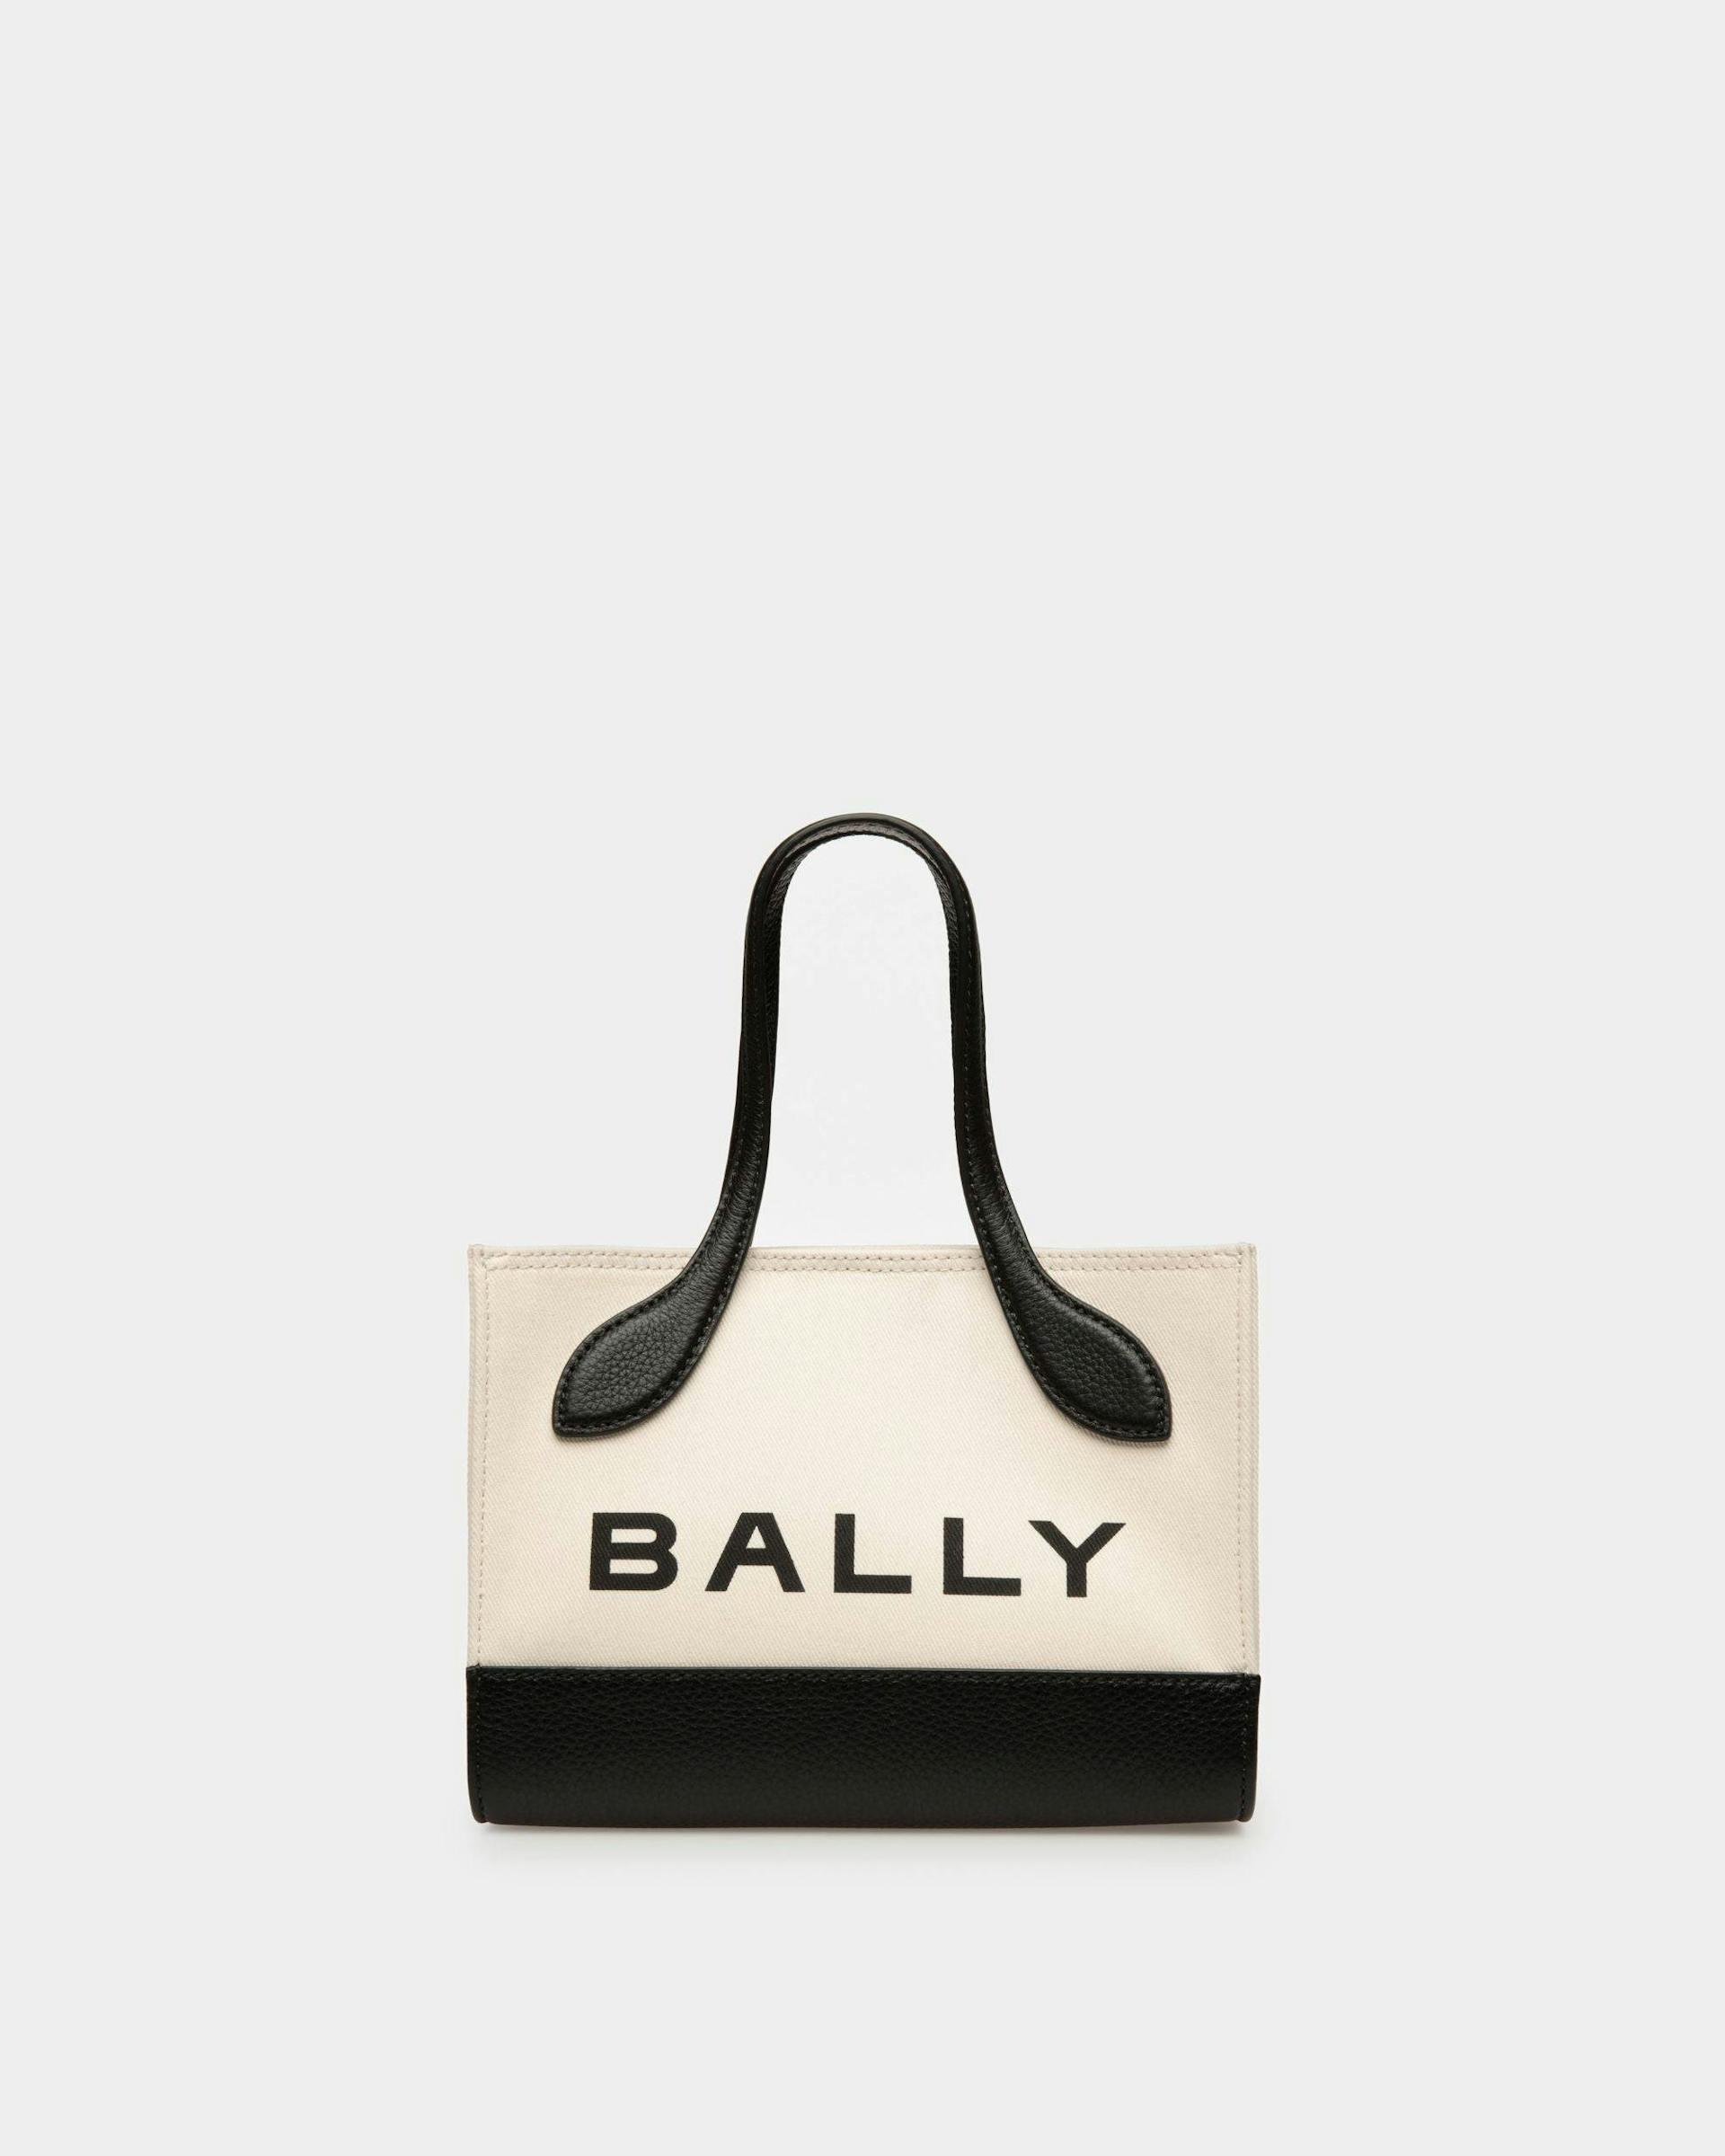 Keep On Extra Small | Women's Minibag | Natural And Black Fabric | Bally